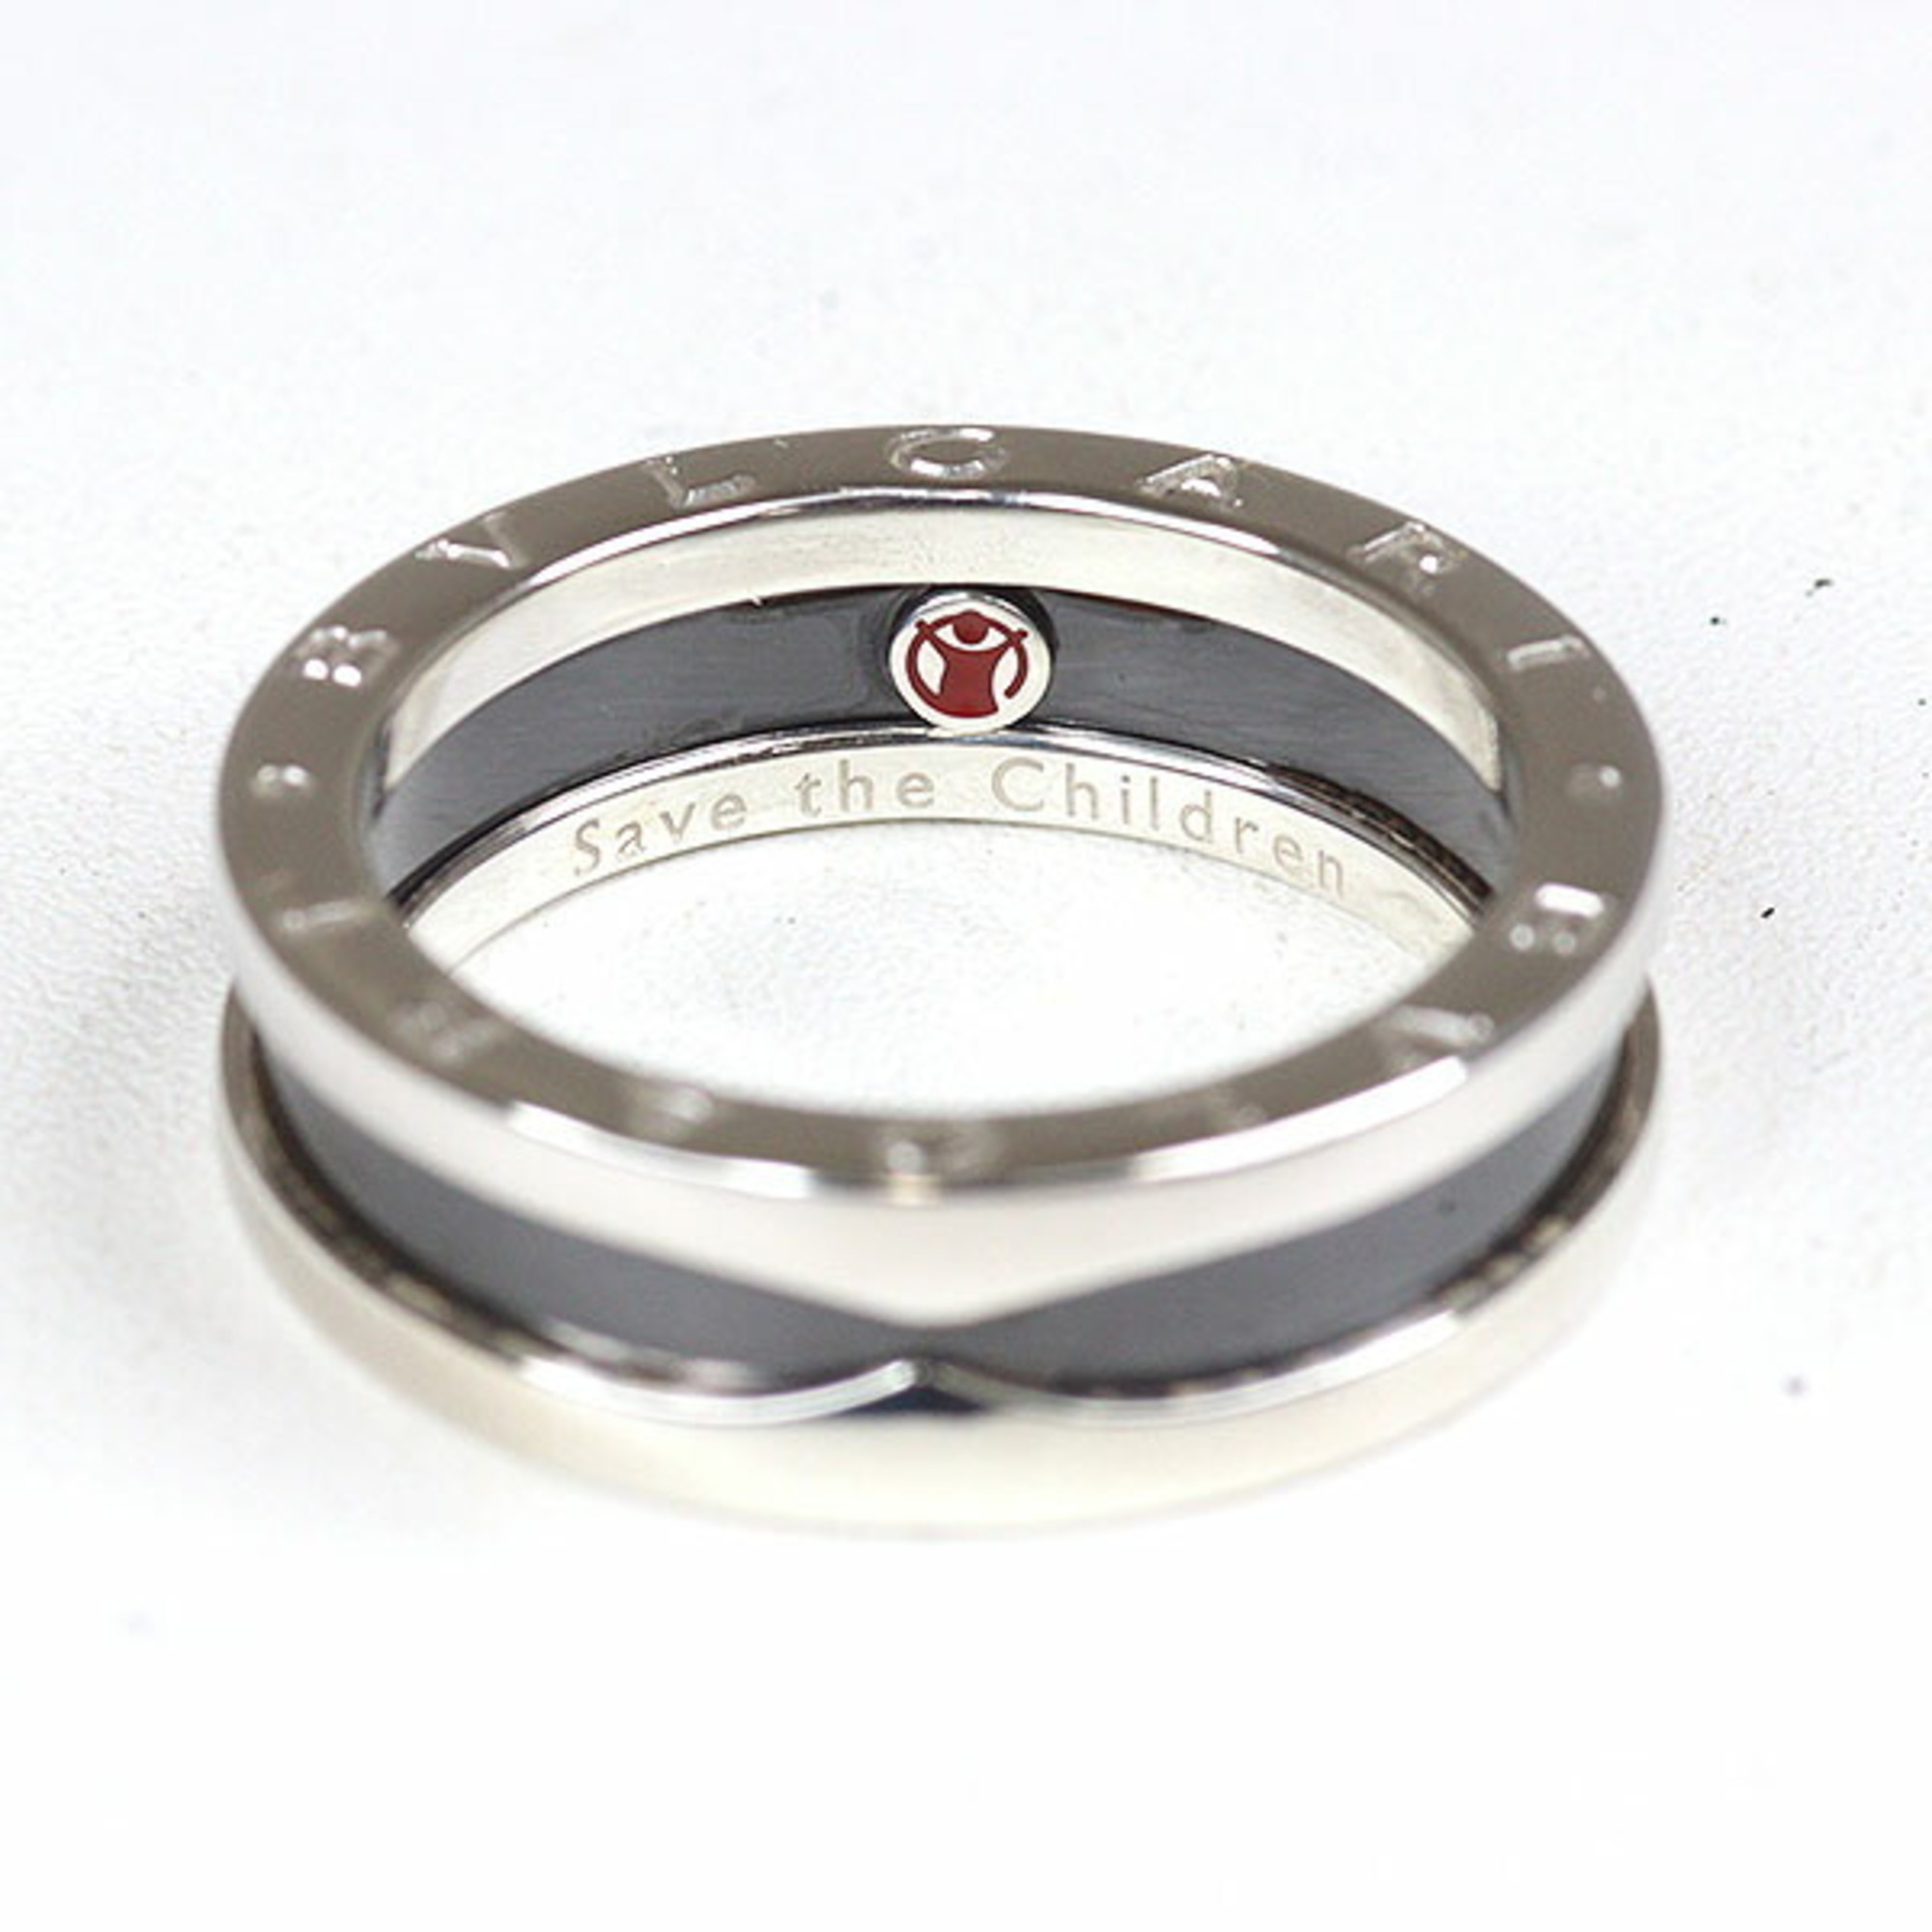 Bvlgari Save the Children Ring 1 Band Ag925 (Silver)/Ceramic 58 Actual Size 17 Finished